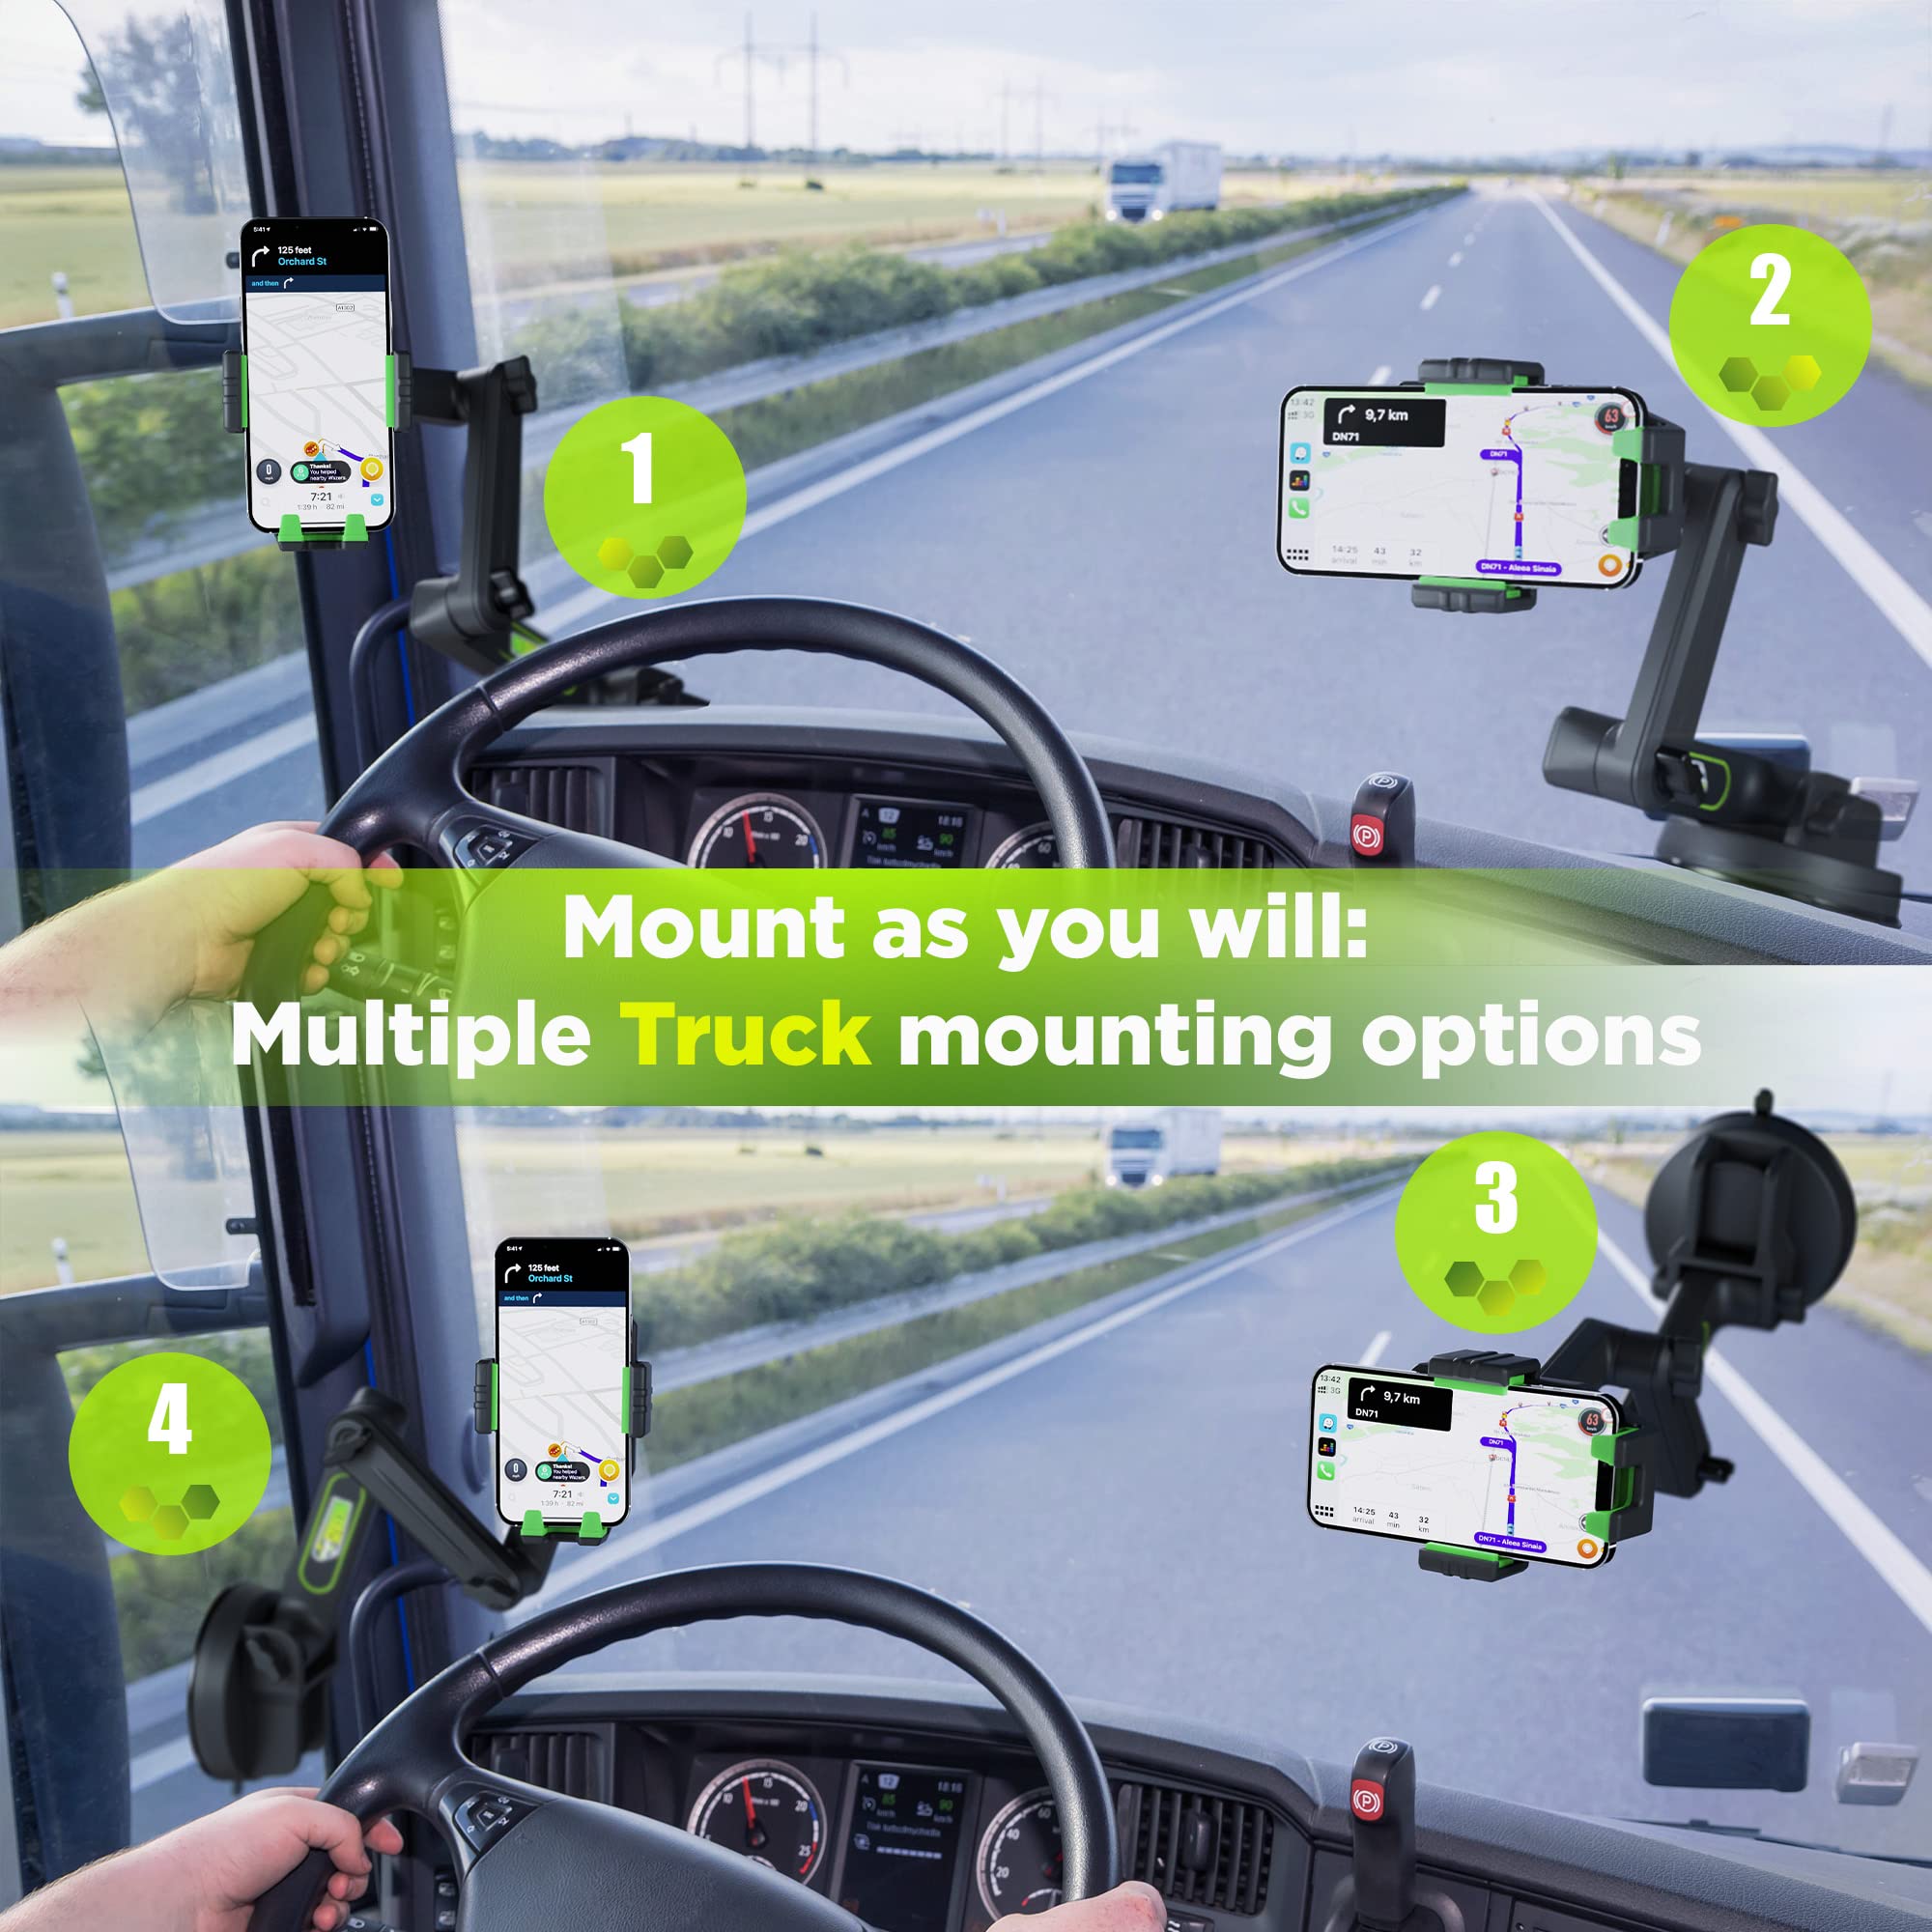 Truckules Truck Phone Holder Mount Heavy Duty Cell Phone Holder for Truck Dashboard Windshield 16.9 inch Long Arm, Super Suction Cup & Stable, Compatible with iPhone & Samsung, Green, Commercial Truck